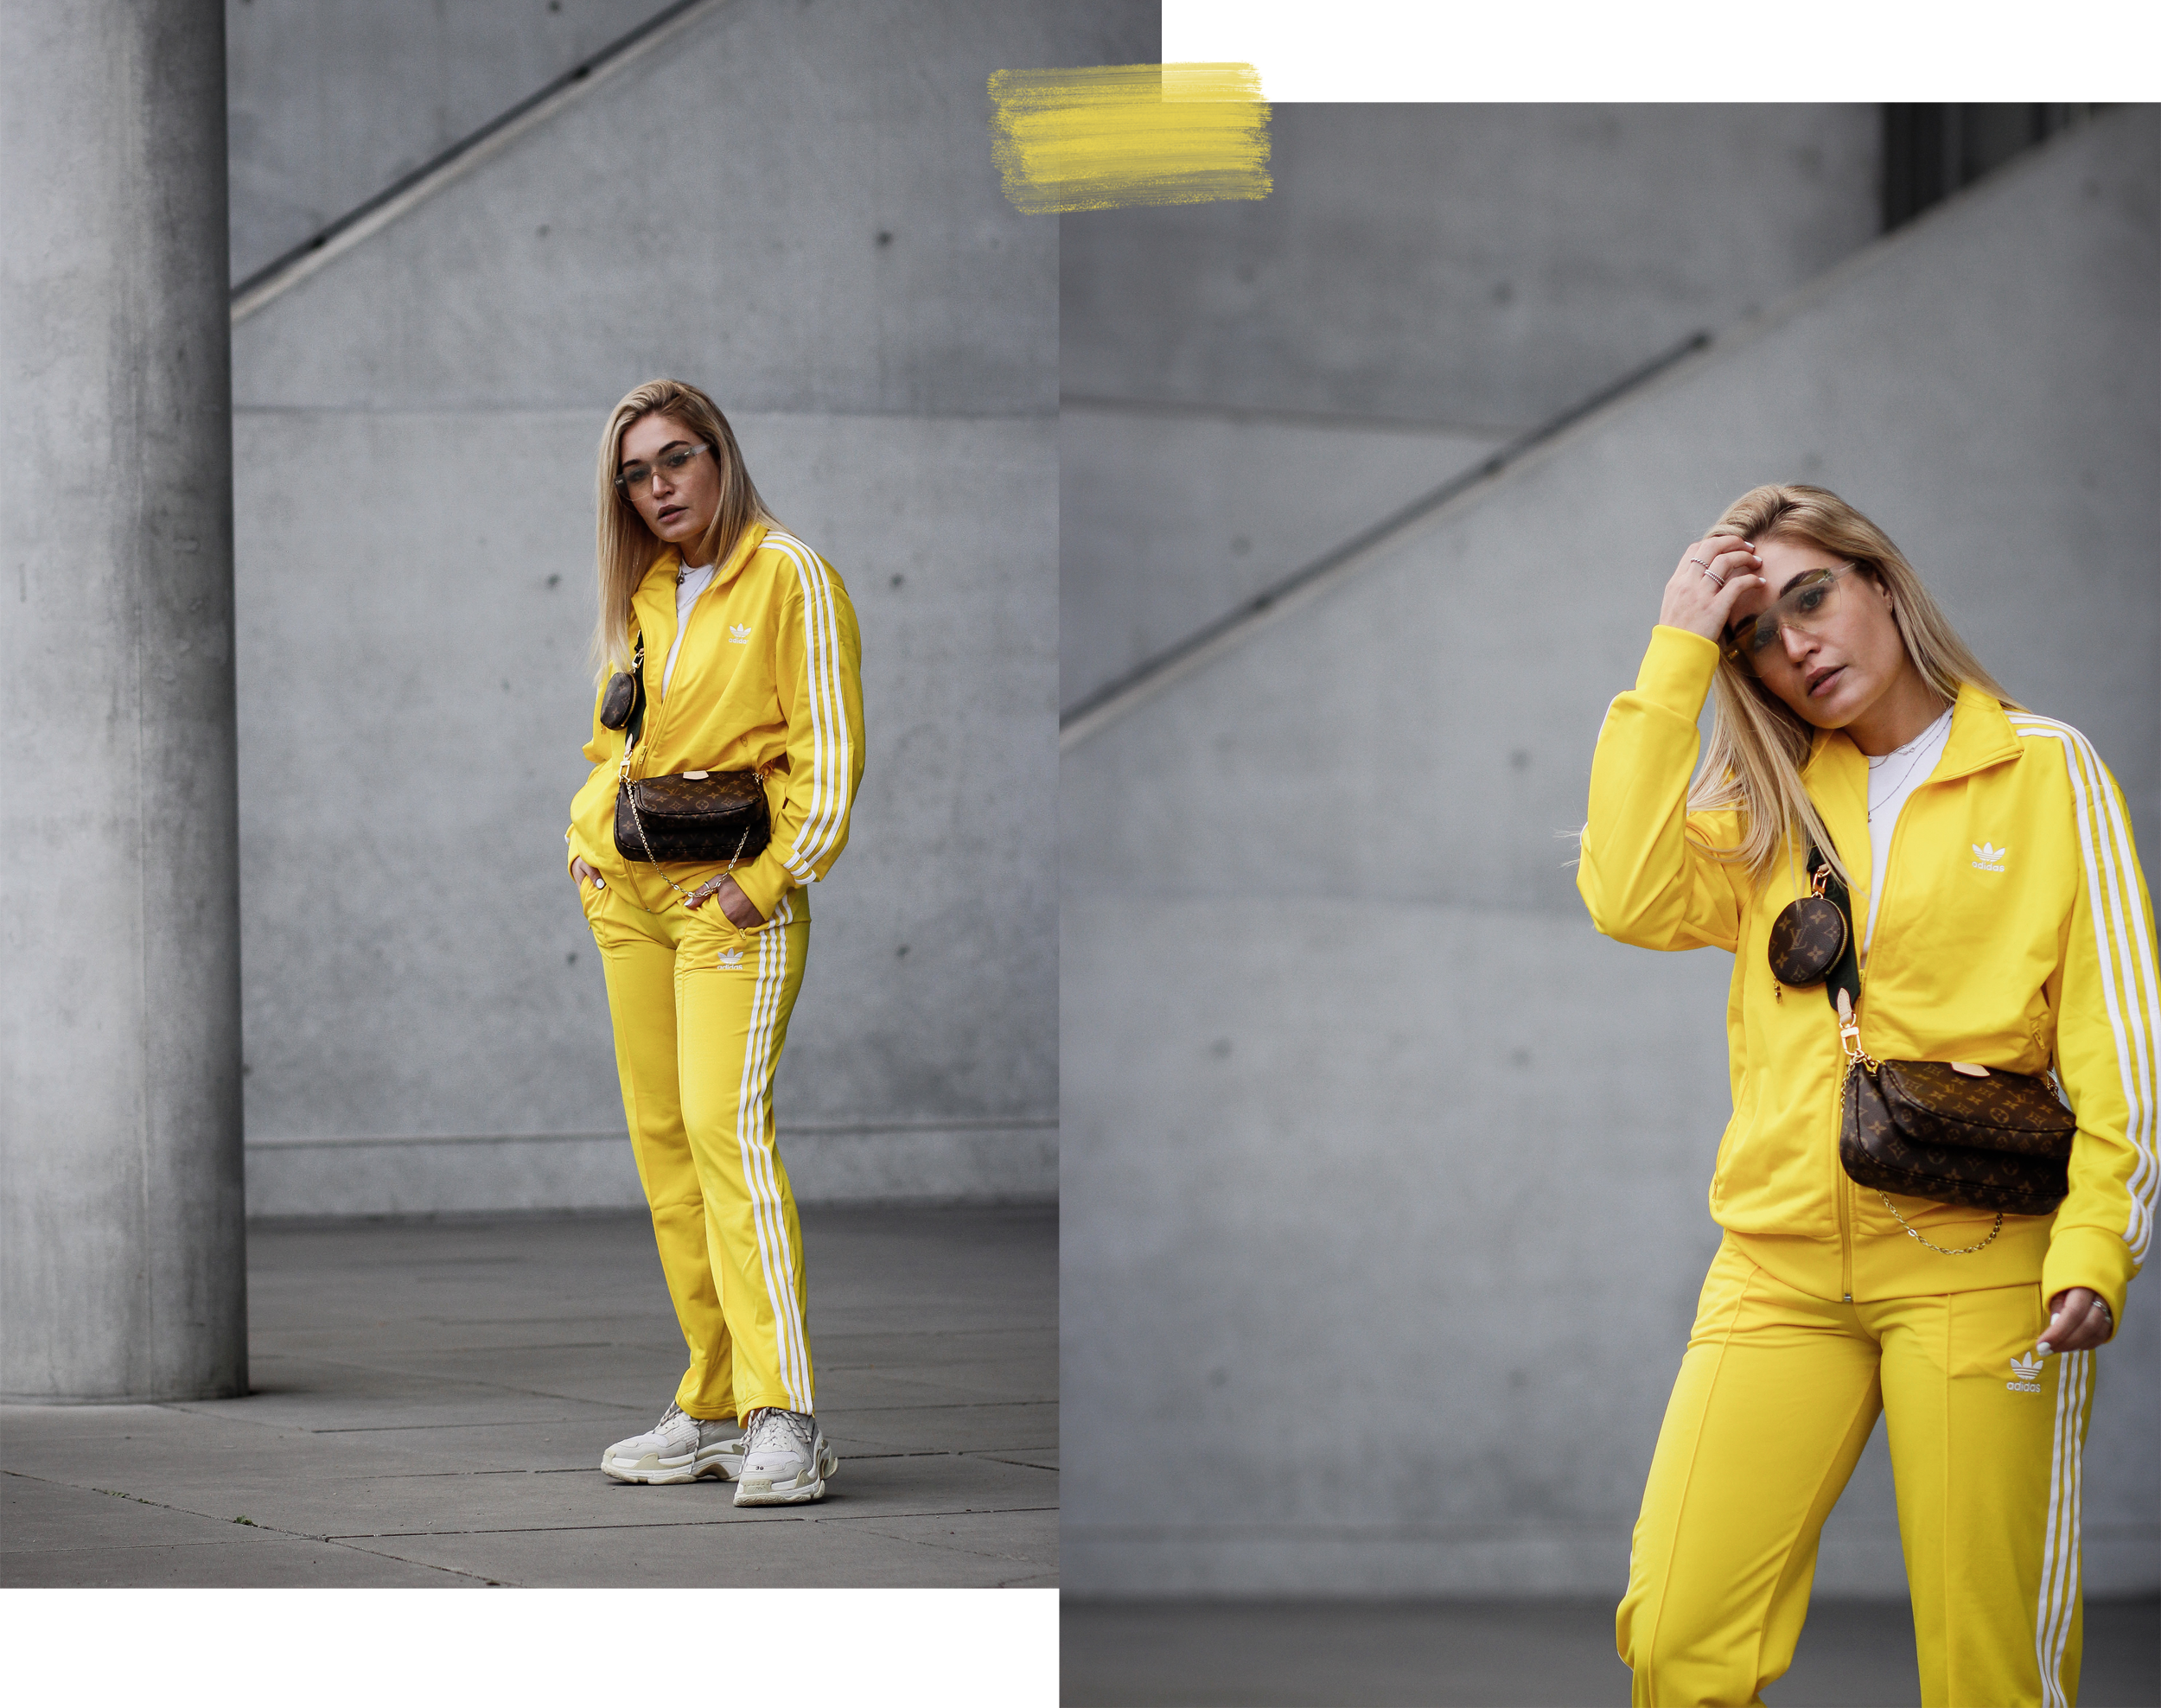 Lauralamode Adidas Outfit Tracksuit Streetstyle Look Outfitoftheday Louis Vuitton Louis Vuitton Multipochette Balenciaga Triple S Munich Berlin Blogger Fashionblogger